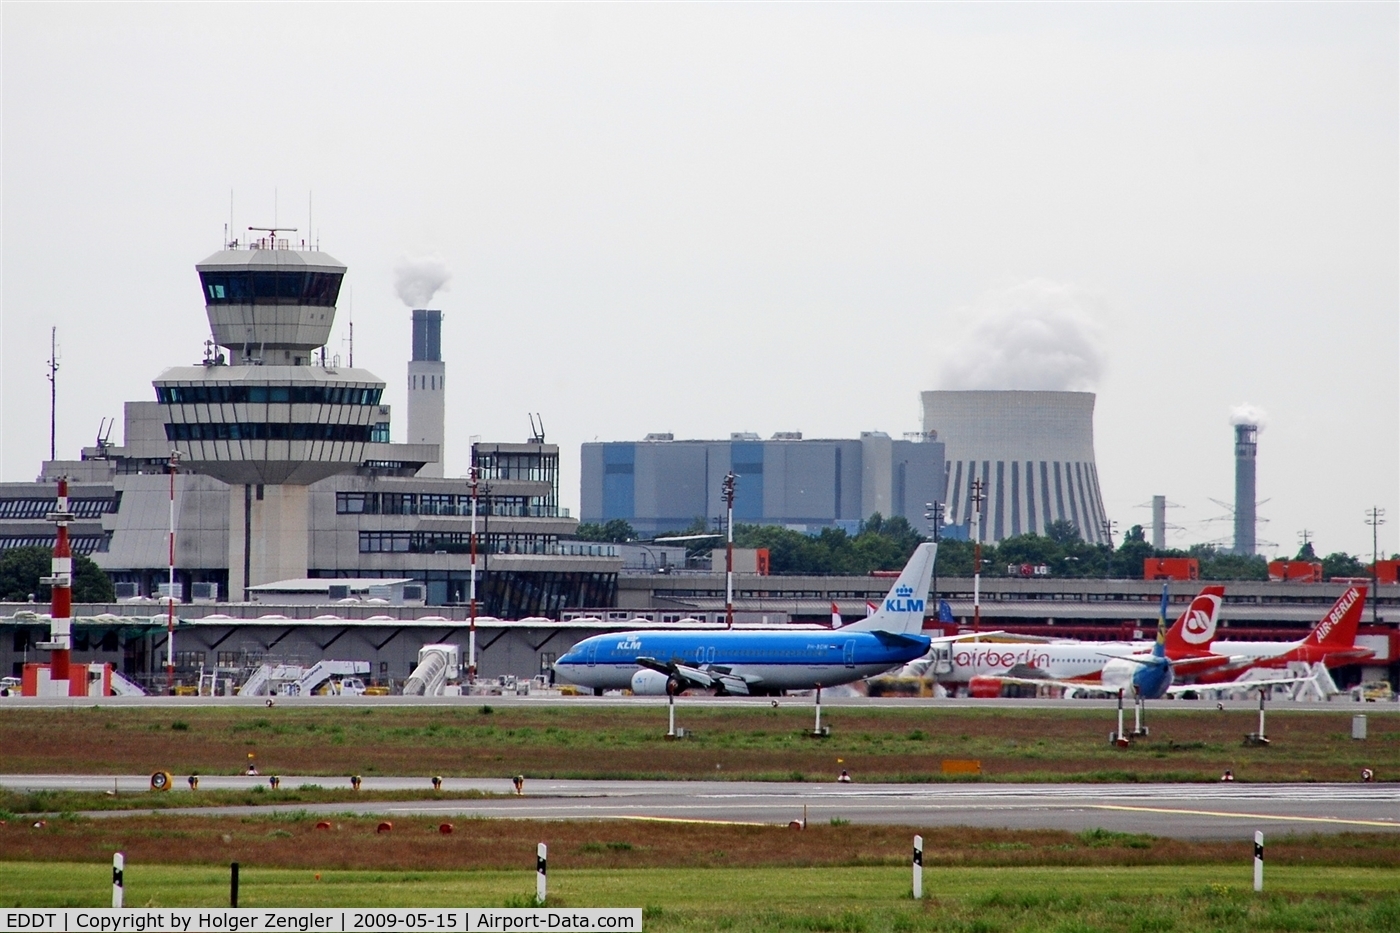 Tegel International Airport (closing in 2011), Berlin Germany (EDDT) - Southern view to apron and terminal building....